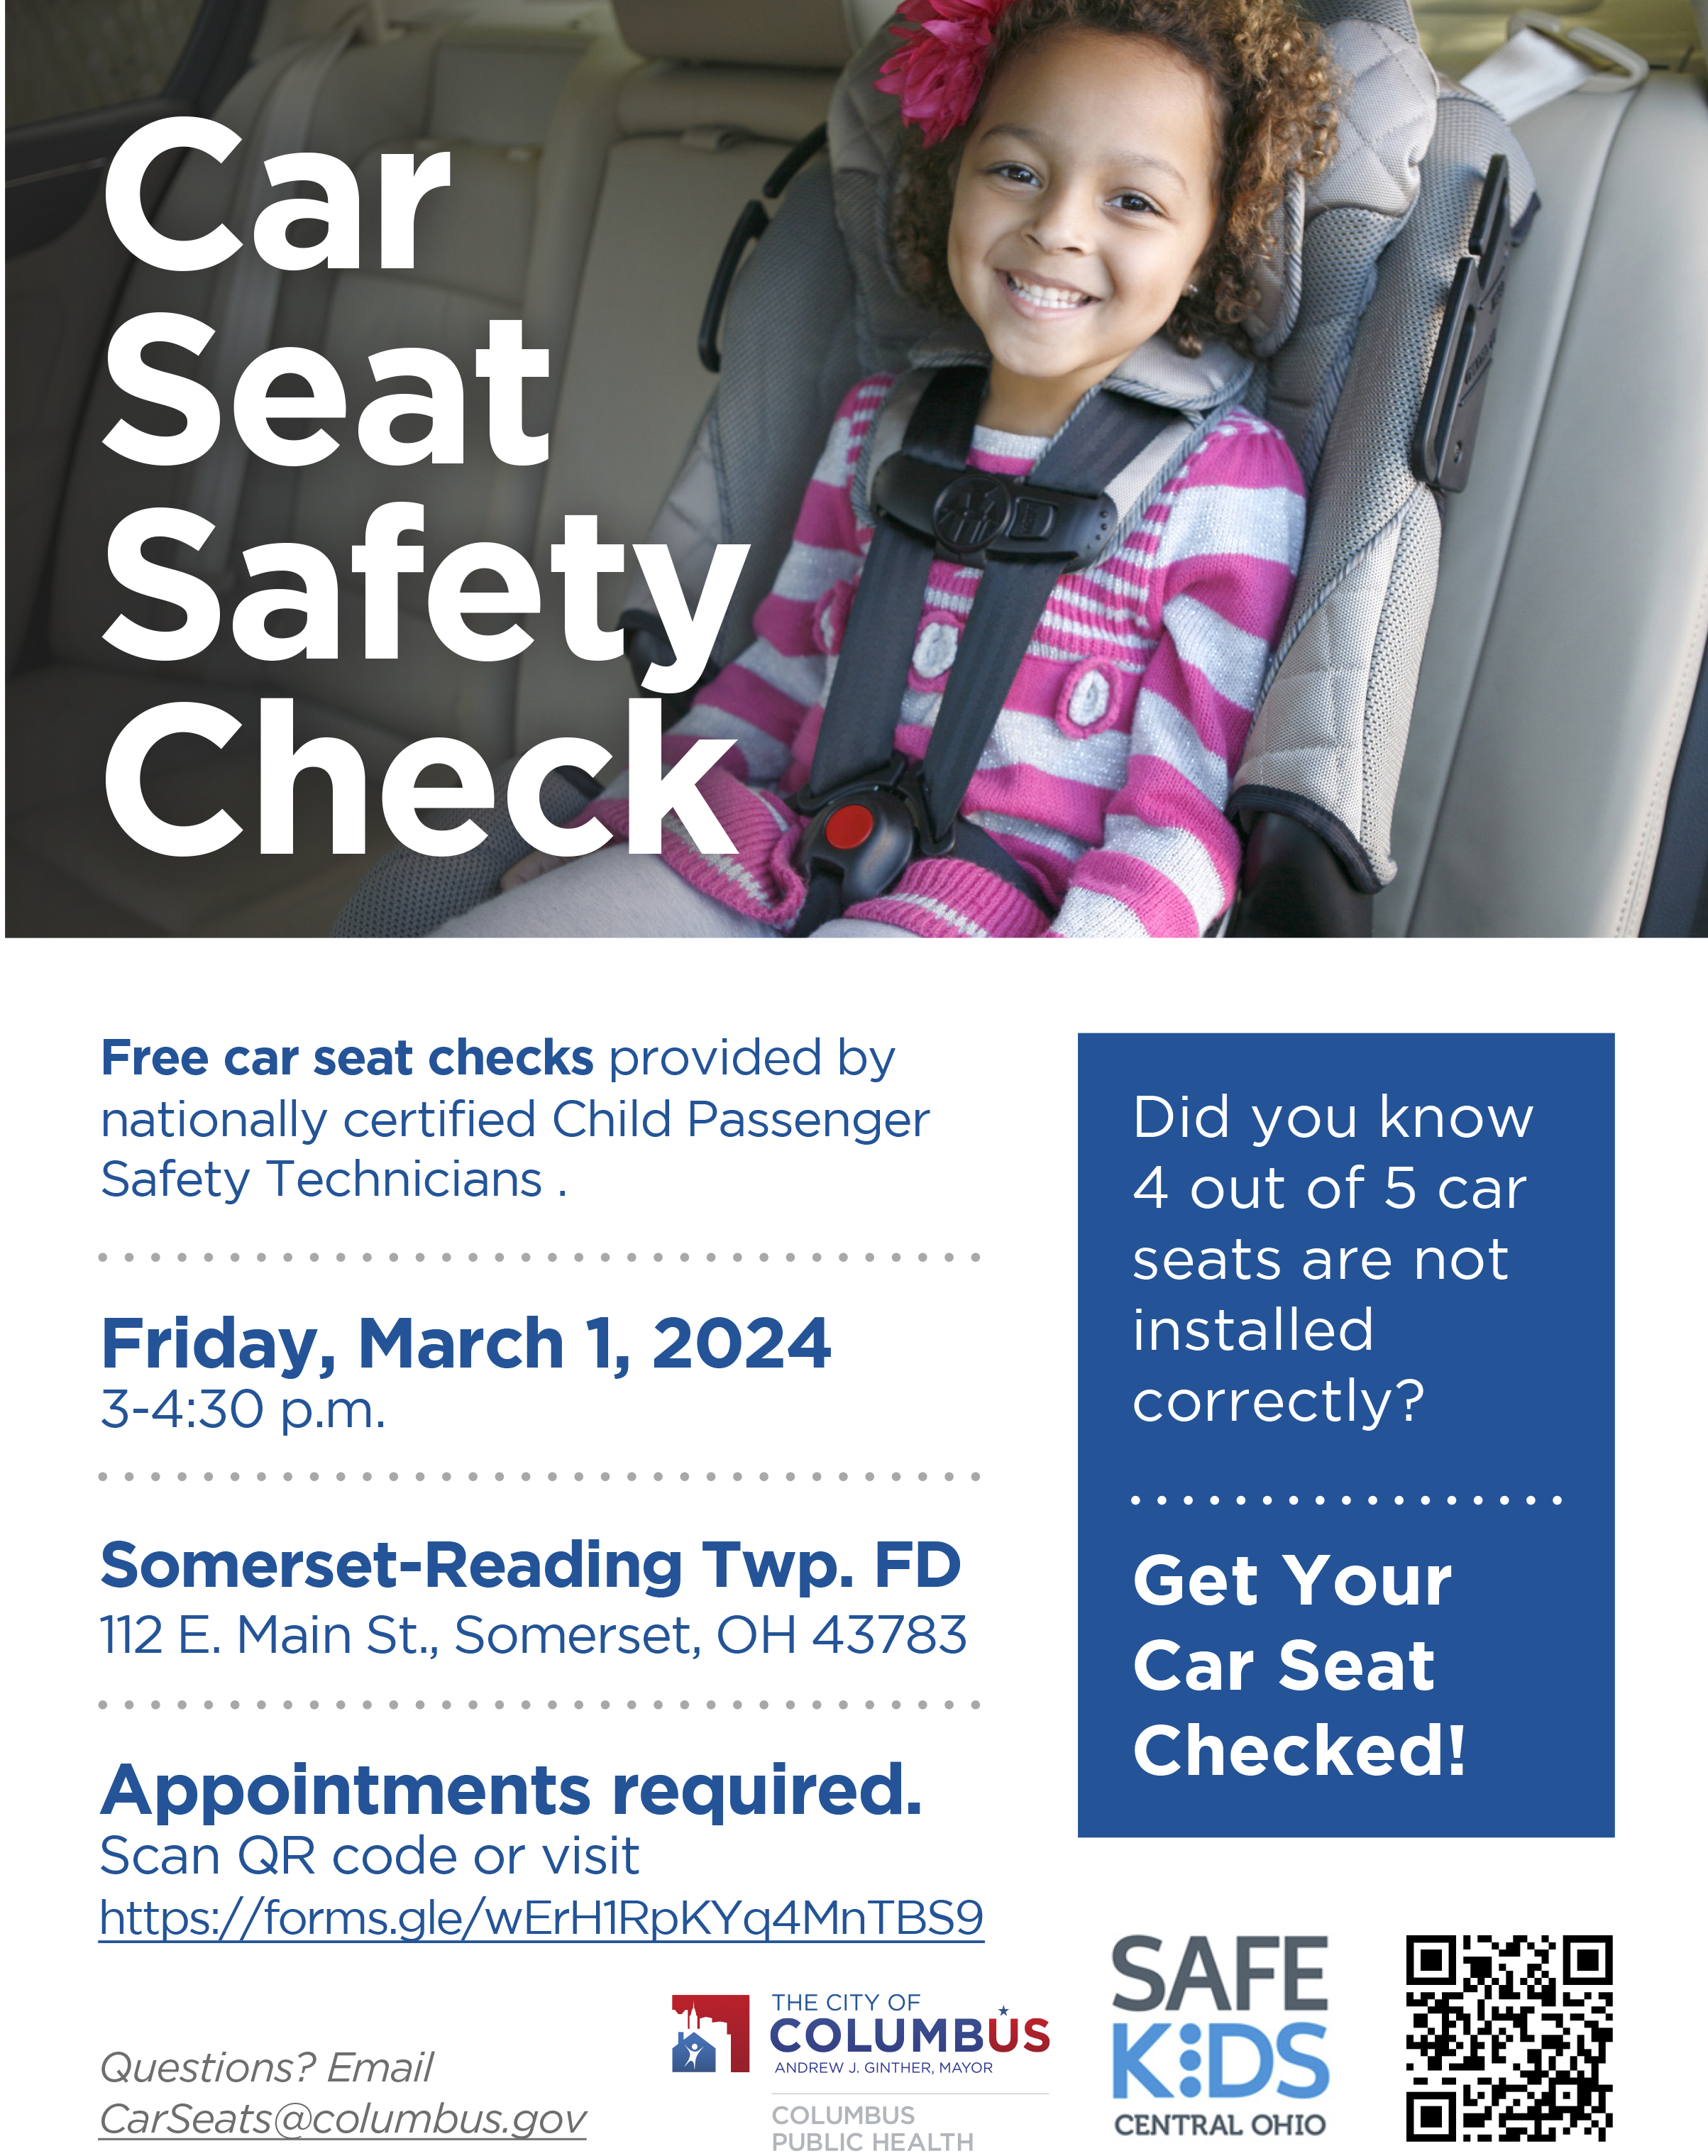 CAR SEAT SAFETY CHECK as